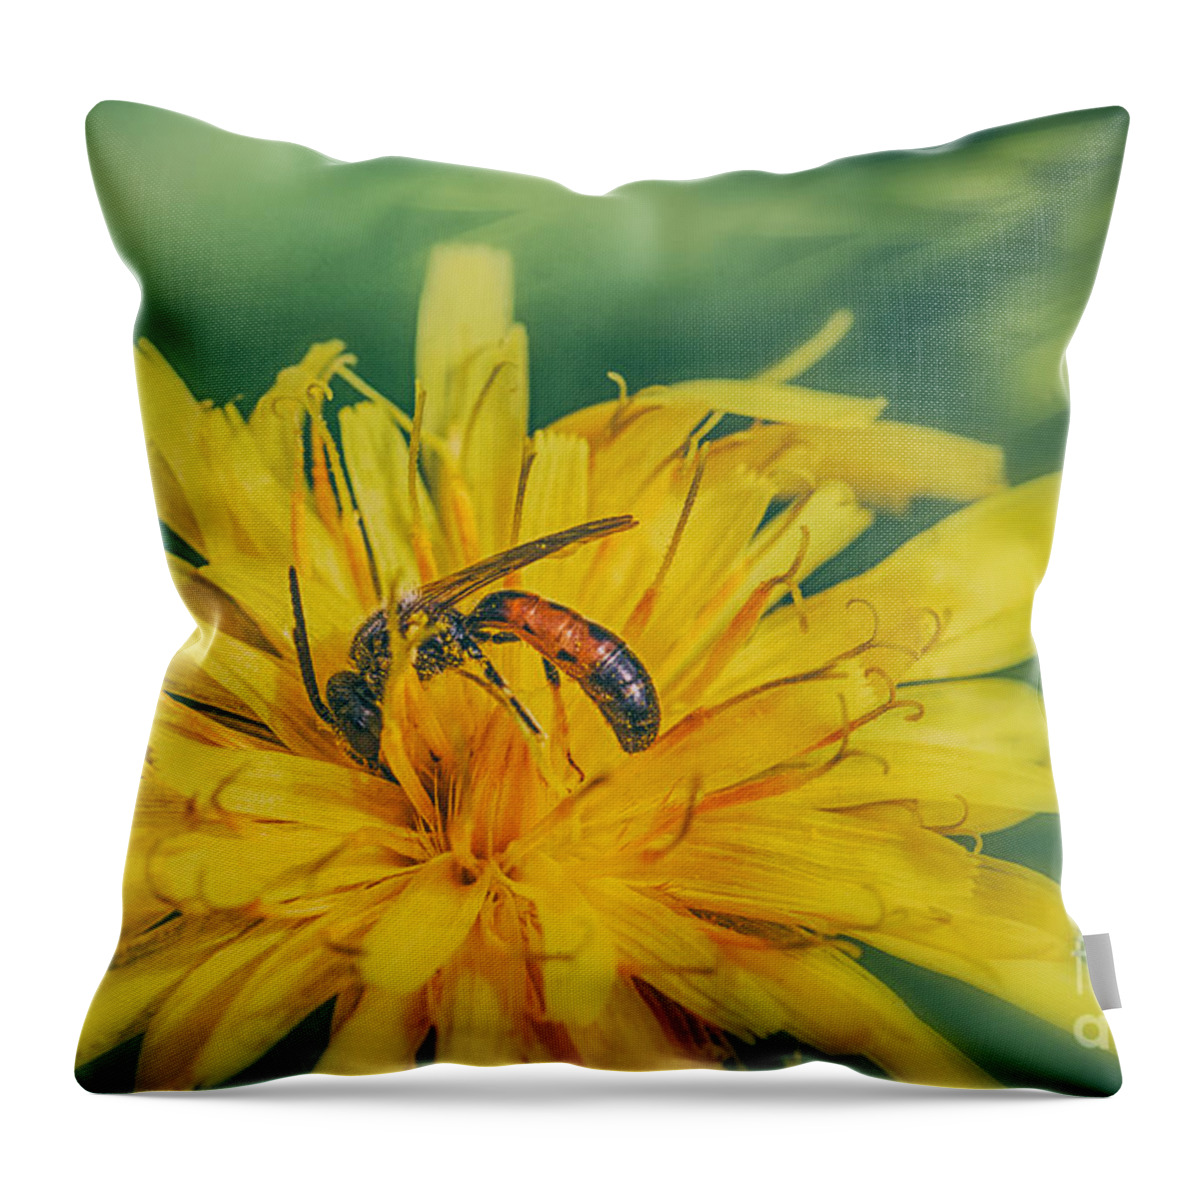 Halictid Bee Throw Pillow featuring the photograph Bee Pollinator by Jivko Nakev